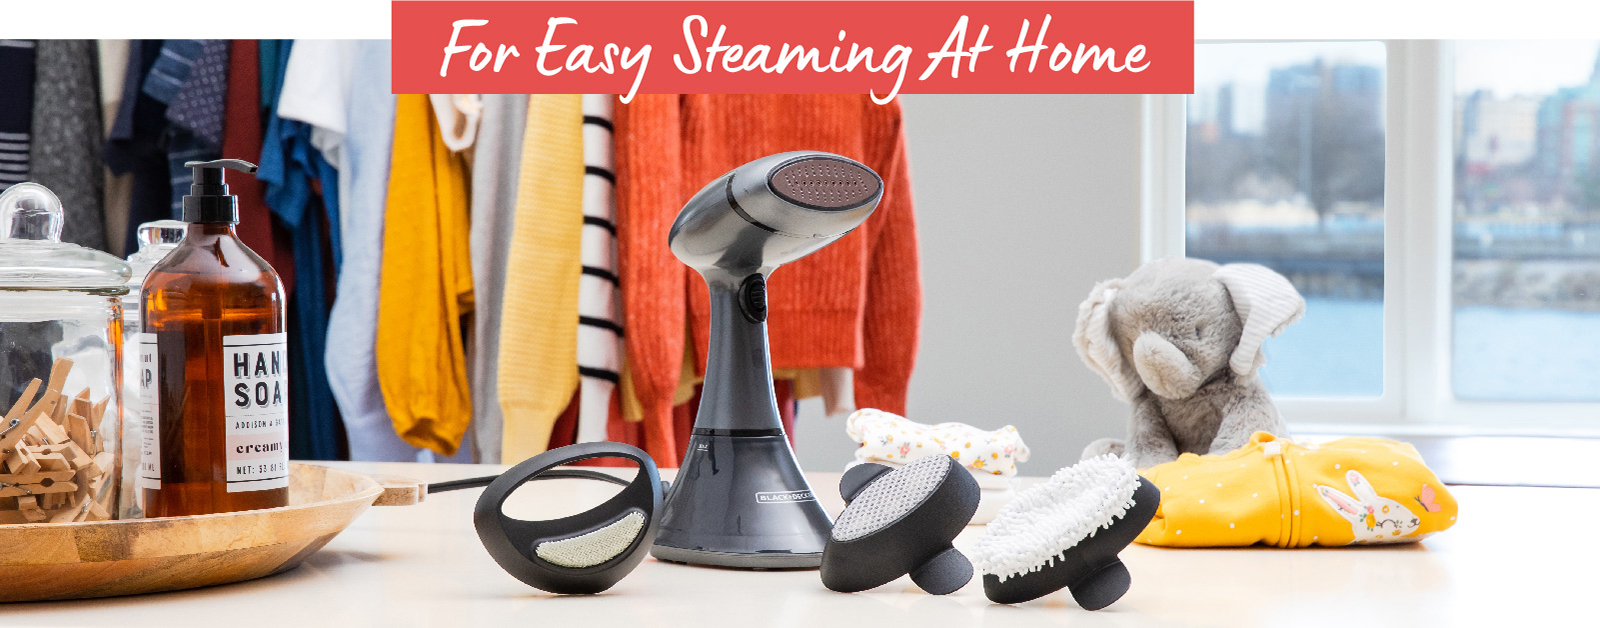 Easy steaming at home with the Advanced Handheld Steamer, shown with attachments.